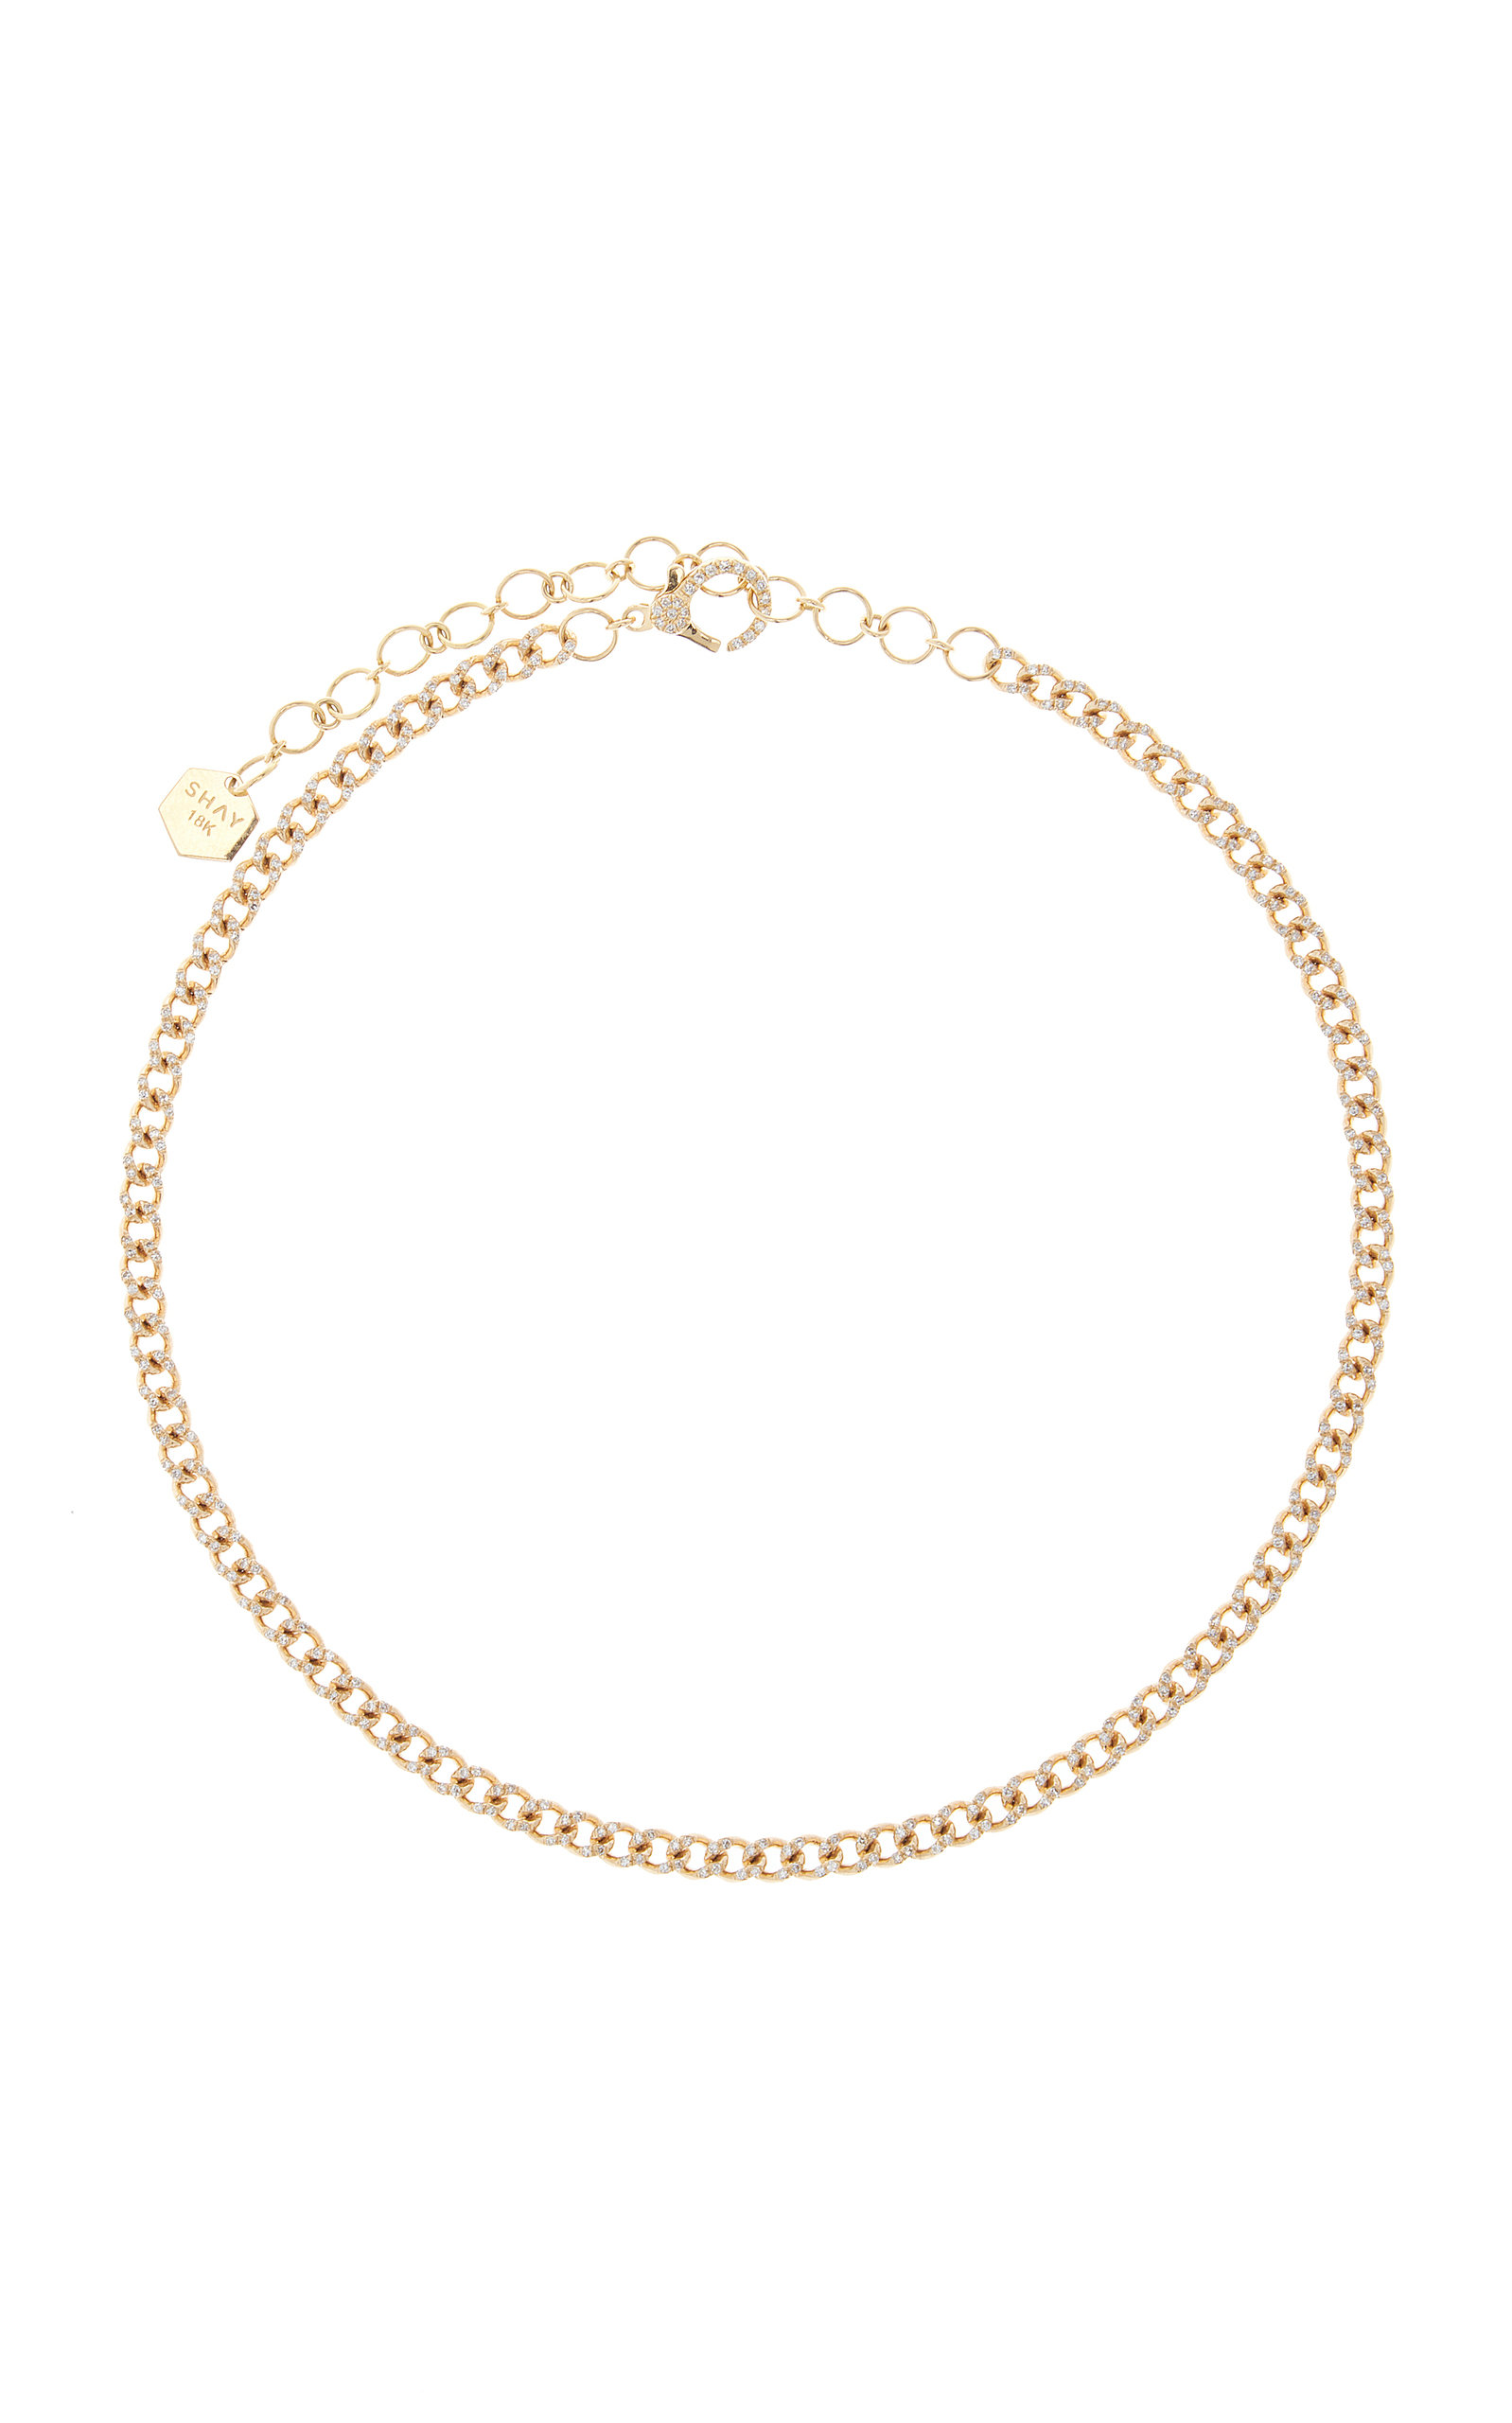 SHAY - Baby 18K Yellow Gold Link Choker - Gold - OS - Moda Operandi - Gifts For Her